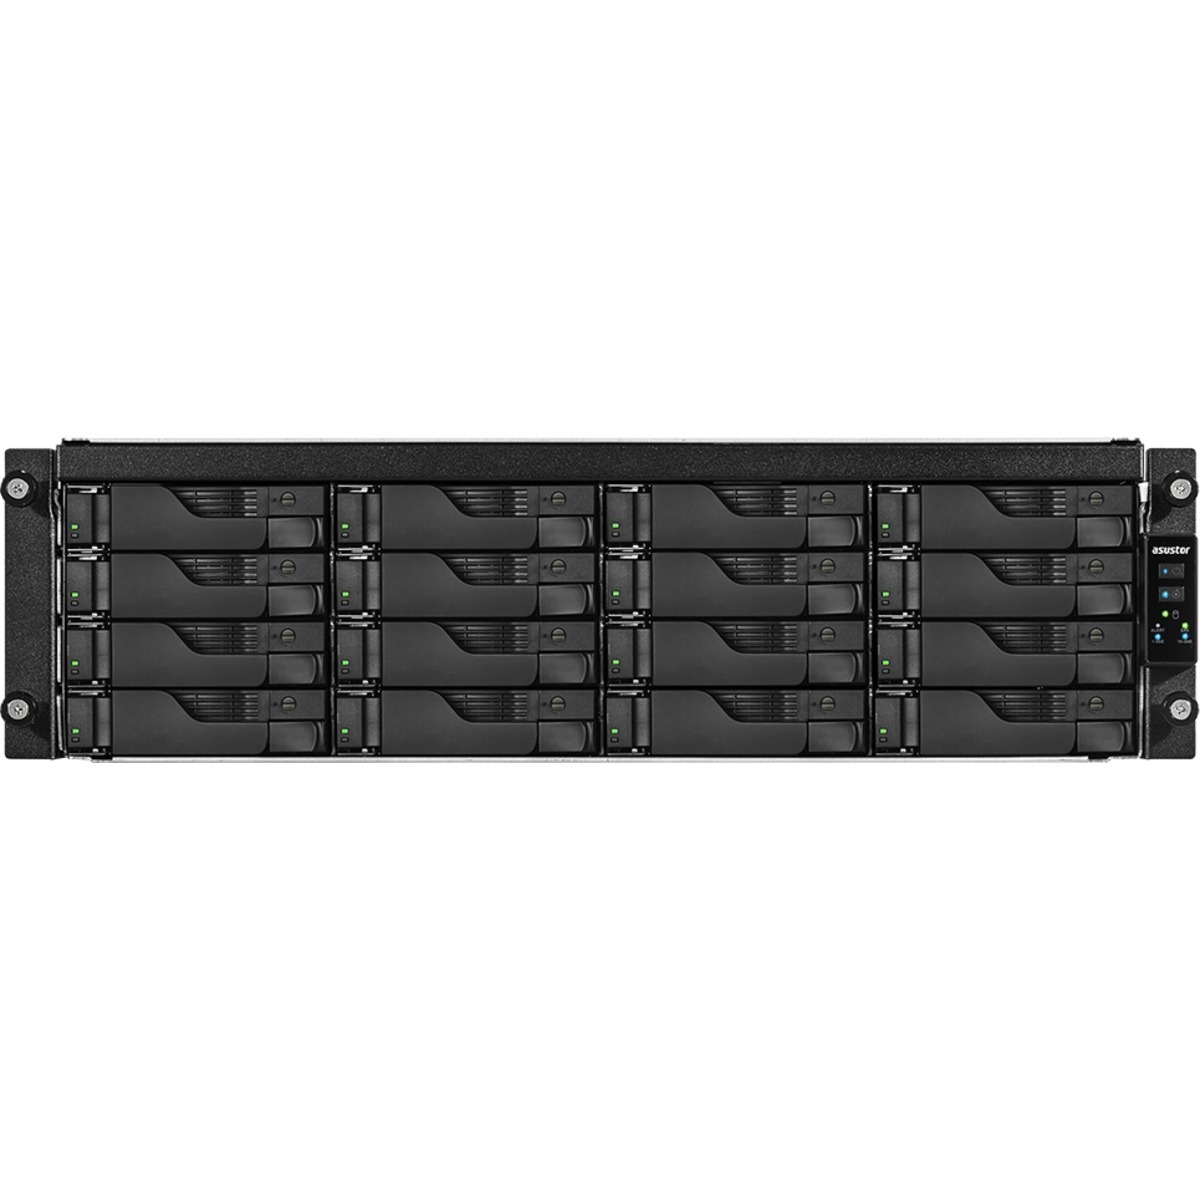 buy $8165 ASUSTOR AS7116RDX Lockerstor 16R Pro 64tb RackMount NAS - Network Attached Storage Device 16x4000gb Western Digital Blue WD40EZRZ 3.5 5400rpm SATA 6Gb/s HDD CONSUMER Class Drives Installed - Burn-In Tested - nas headquarters buy network attached storage server device das new raid-5 free shipping usa christmas new year holiday sale AS7116RDX Lockerstor 16R Pro